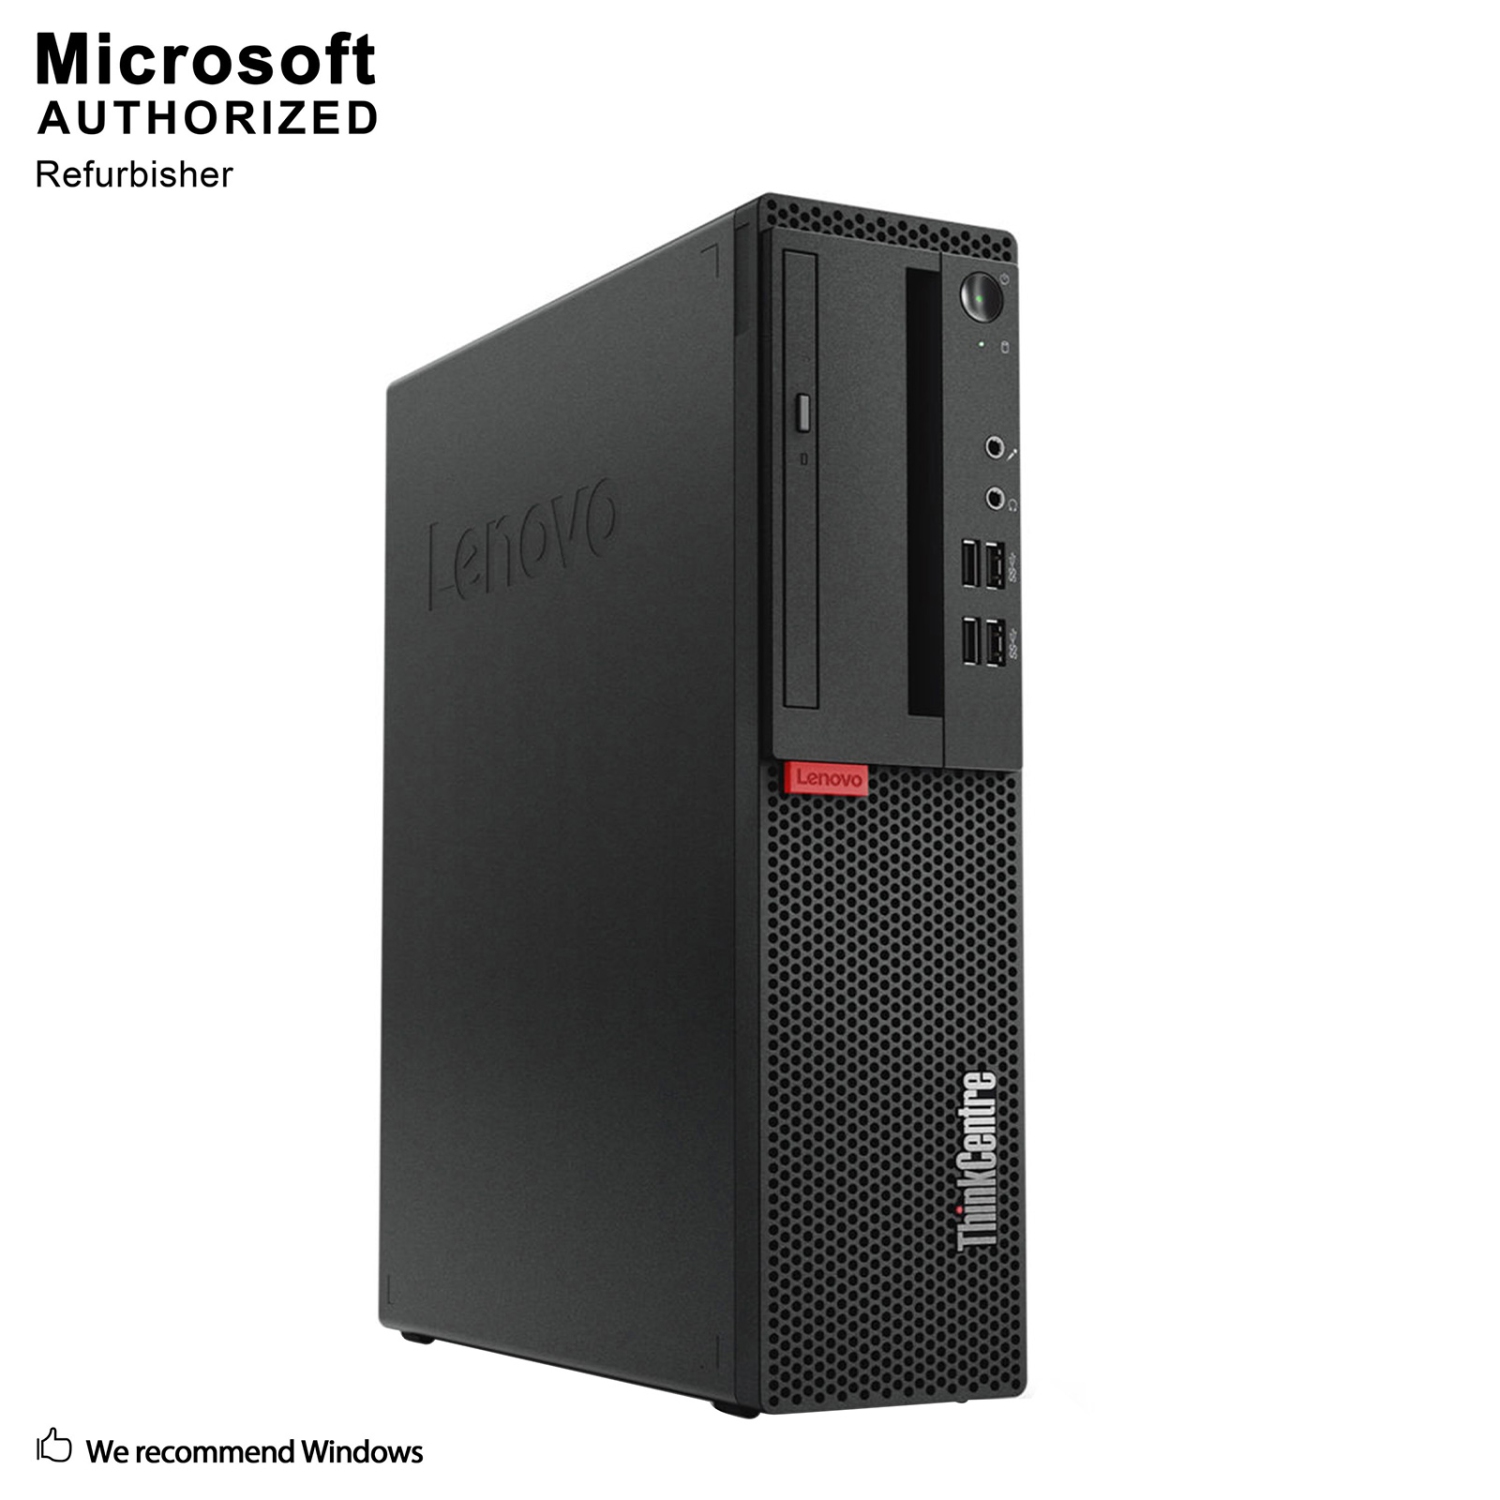 Refurbished (Good) - Lenovo ThinkCentre M910S SFF PC, Intel Core I5-6500 3.2Ghz, 8G DDR4, 256 GB SSD, DVD, 4K Support, Keyboard & Mouse, Win 10 Pro 64-bit (EN/ES/FR)